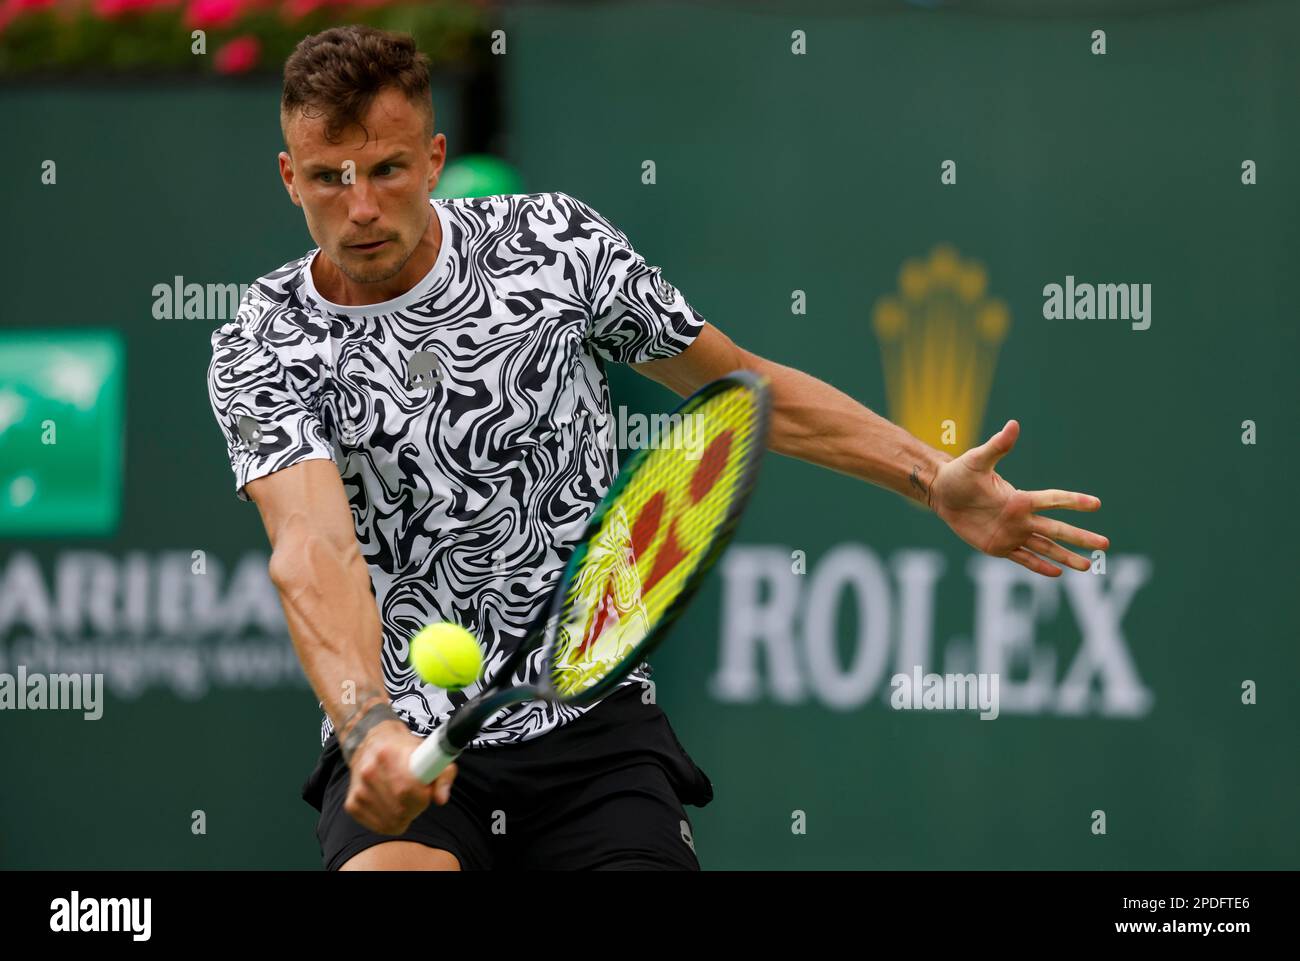 March 14, 2023 Marton Fucsovics of Hungary returns a shot against Taylor Fritz during the 2023 BNP Paribas Open at Indian Wells Tennis Garden in Indian Wells, California